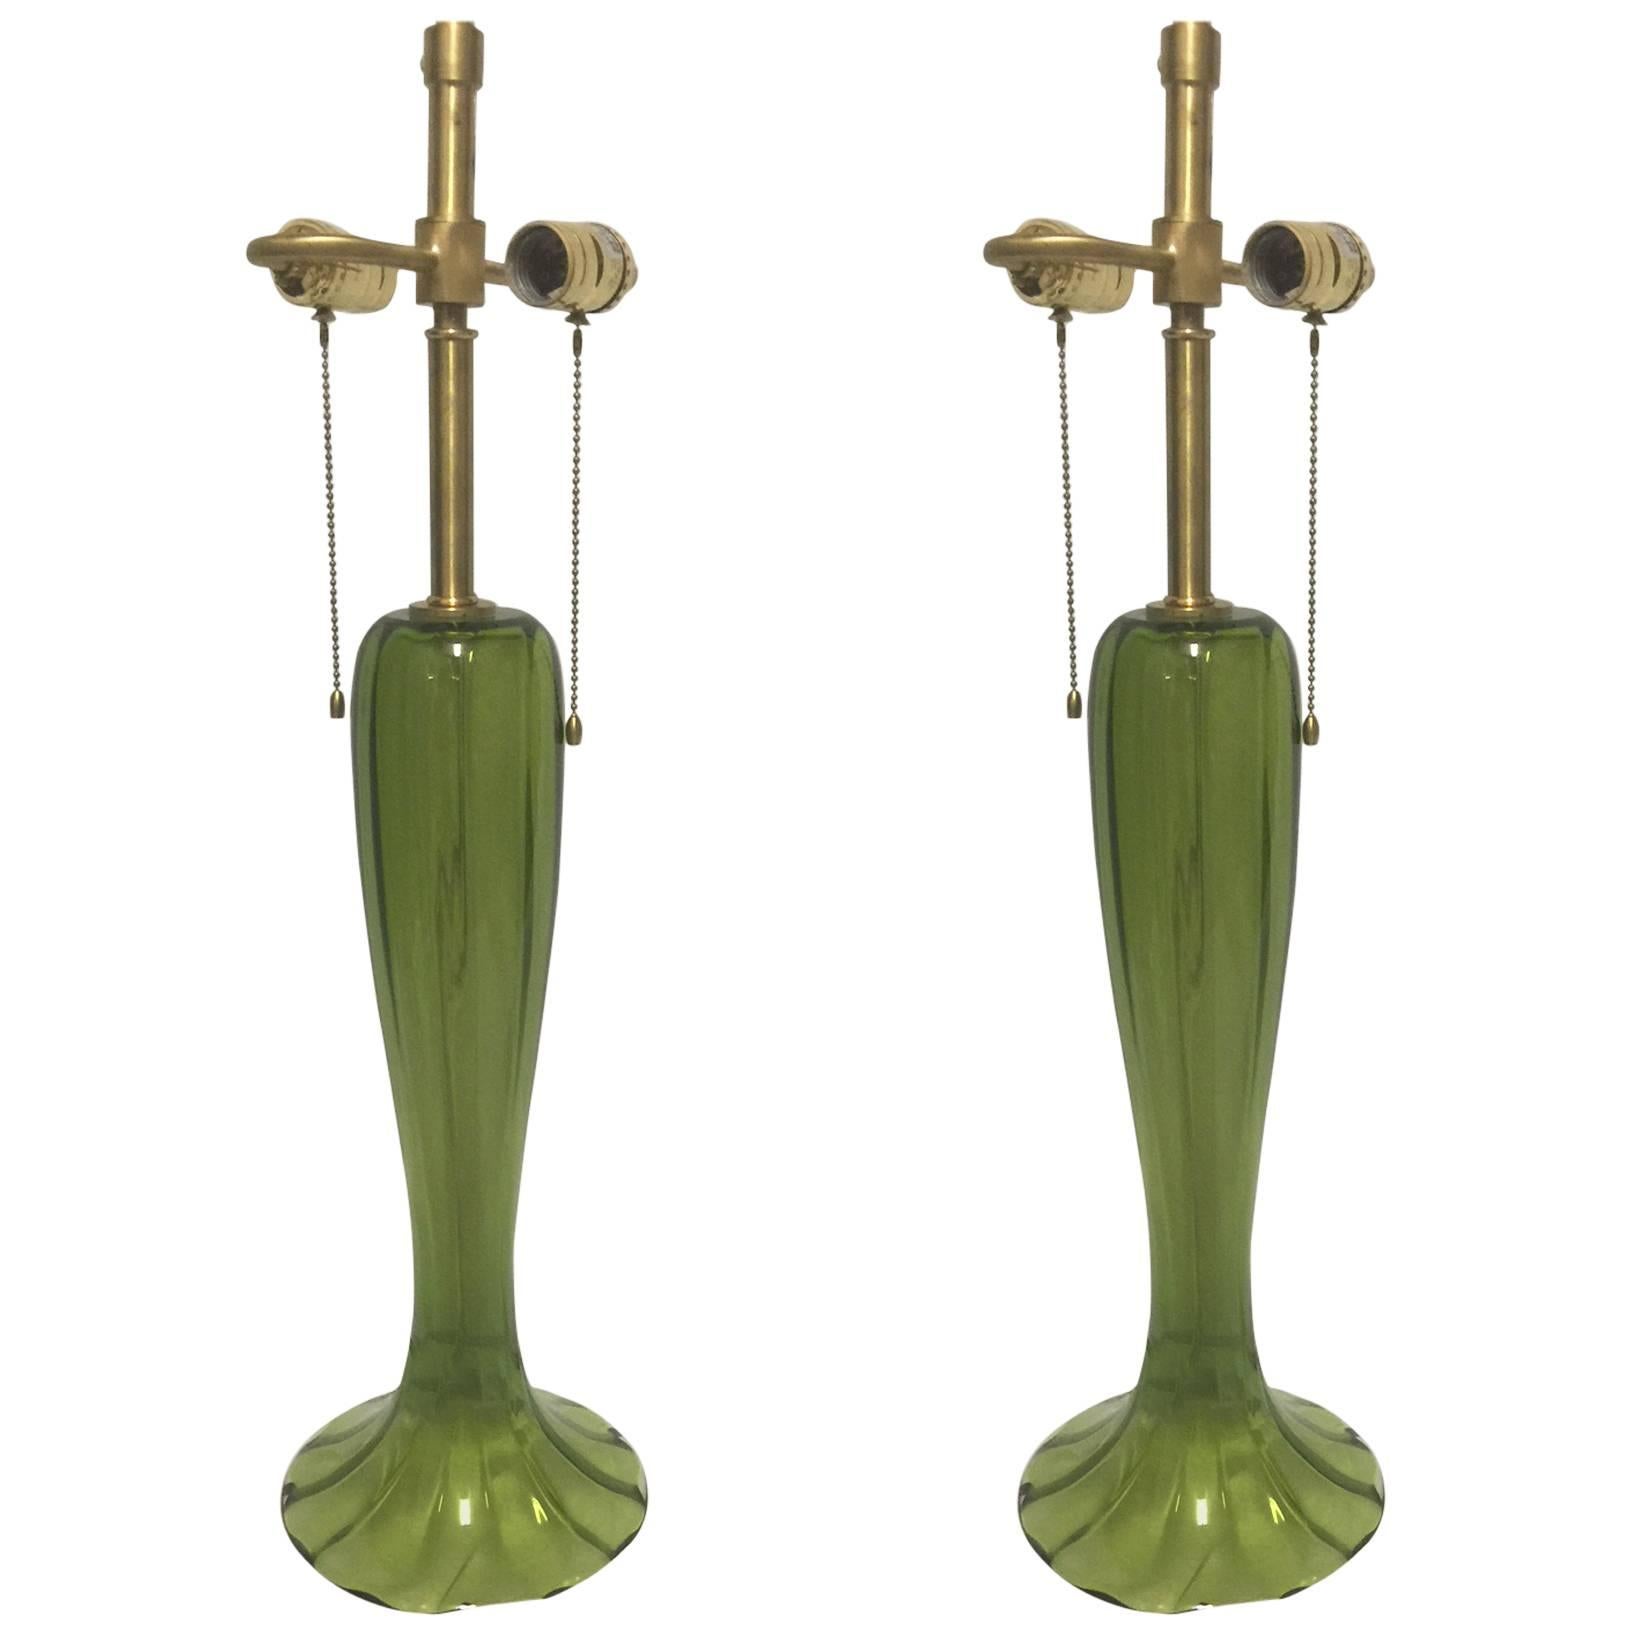 Gorgeous Pair of Candy Apple Green Murano Art Glass Trumpet Lamps